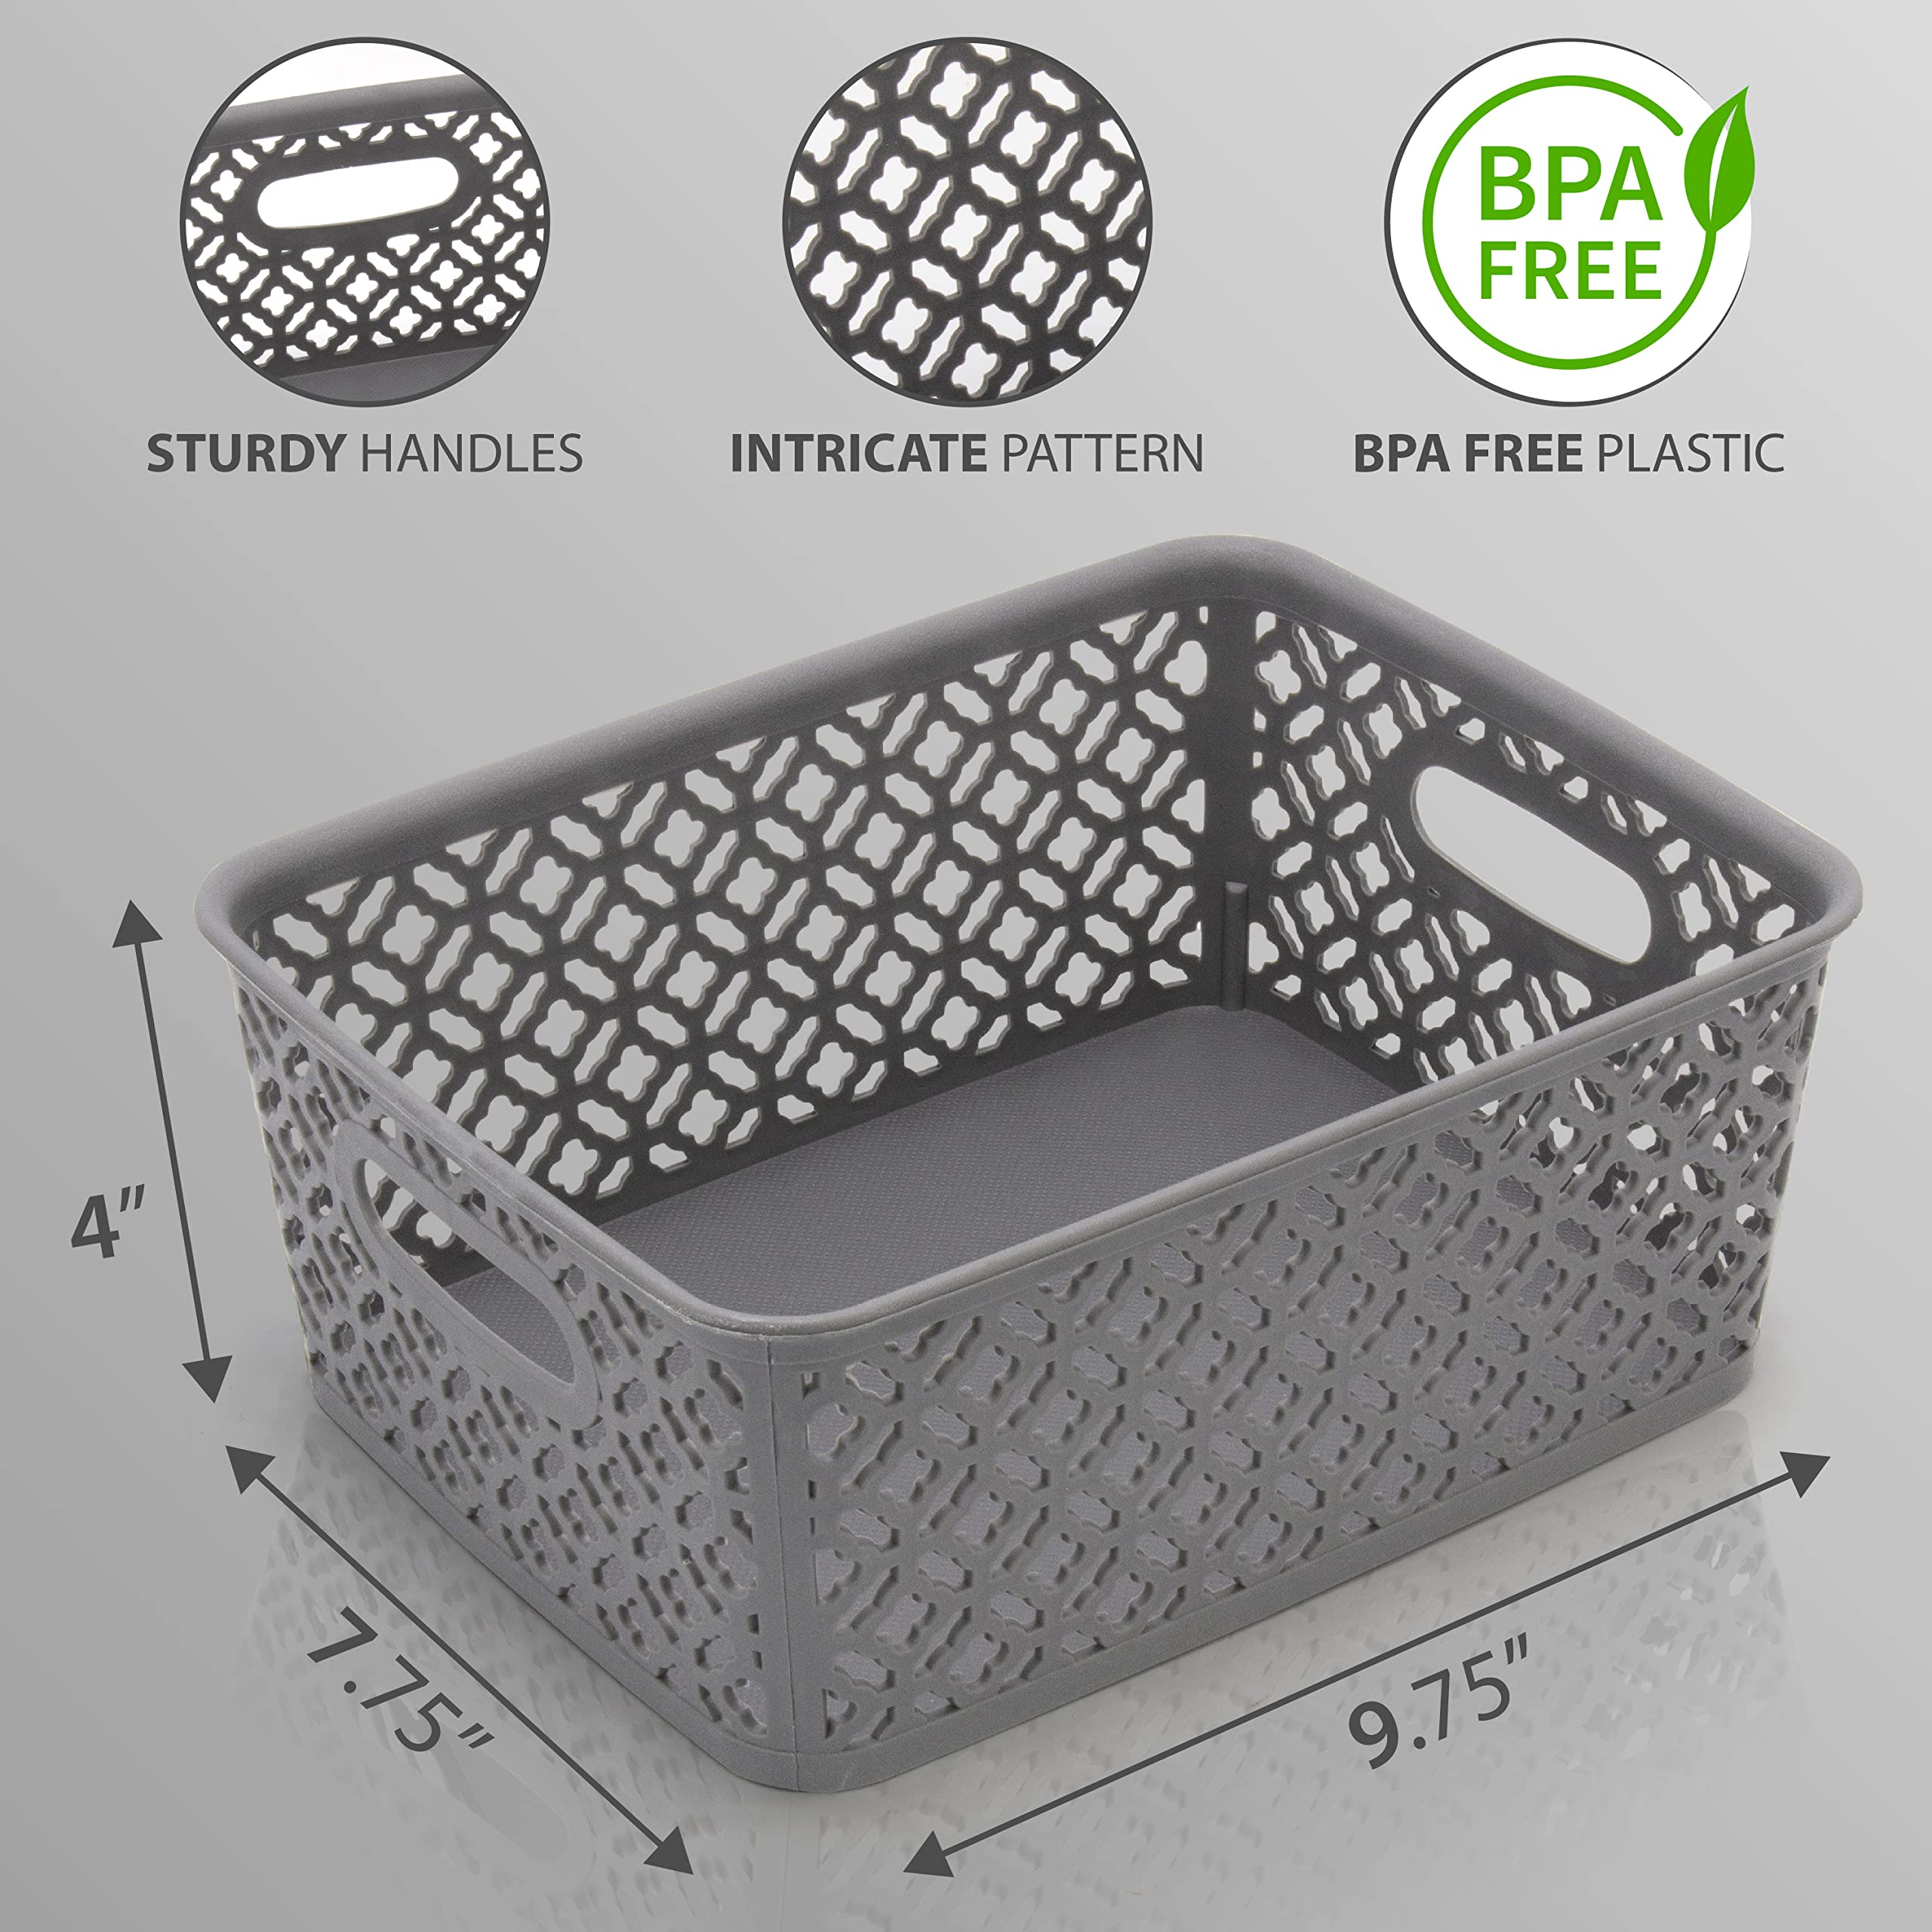 BROOKSTONE, 6 Pack Small Storage Baskets with Handles, Decorative Woven Pattern, Versatile and Stylish Organizers for Home, BPA Free Plastic Bins